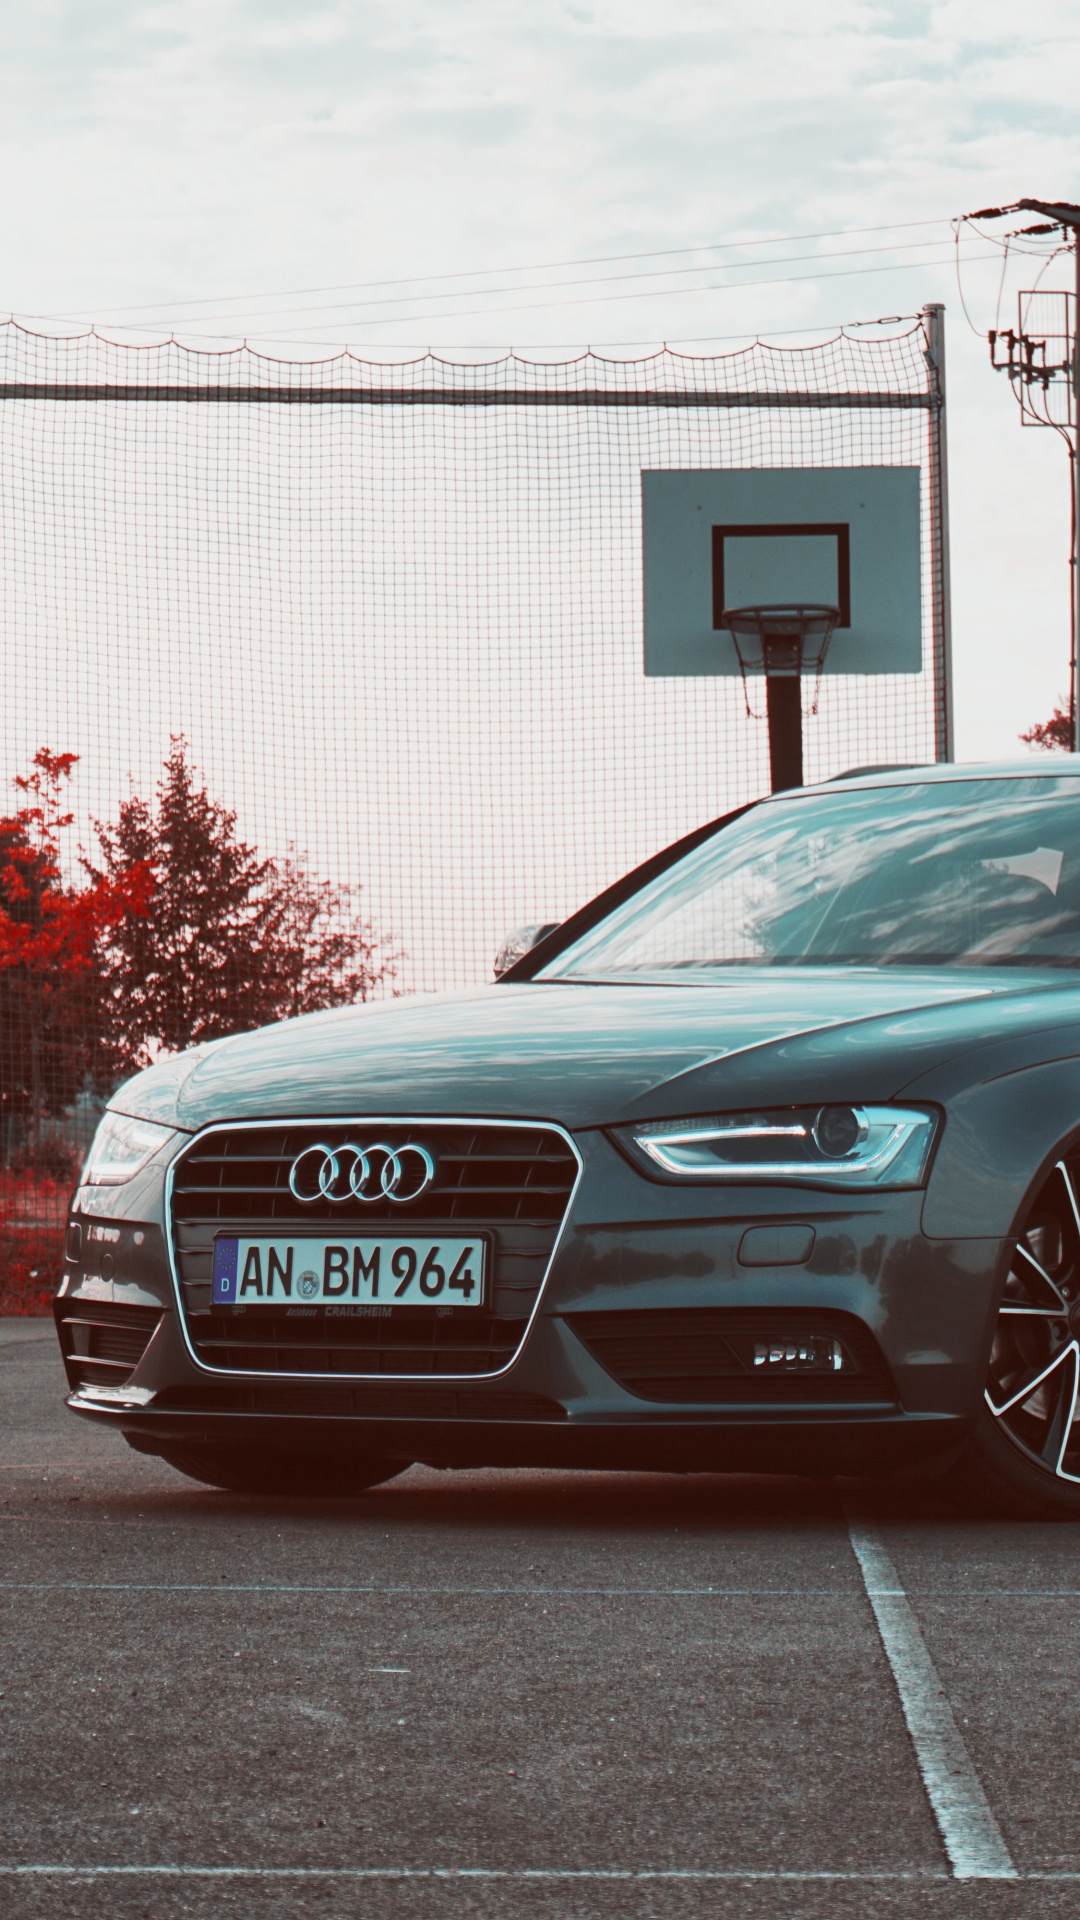 Black Audi Sedan Parked on Gray Concrete Road During Daytime. Wallpaper in 1080x1920 Resolution